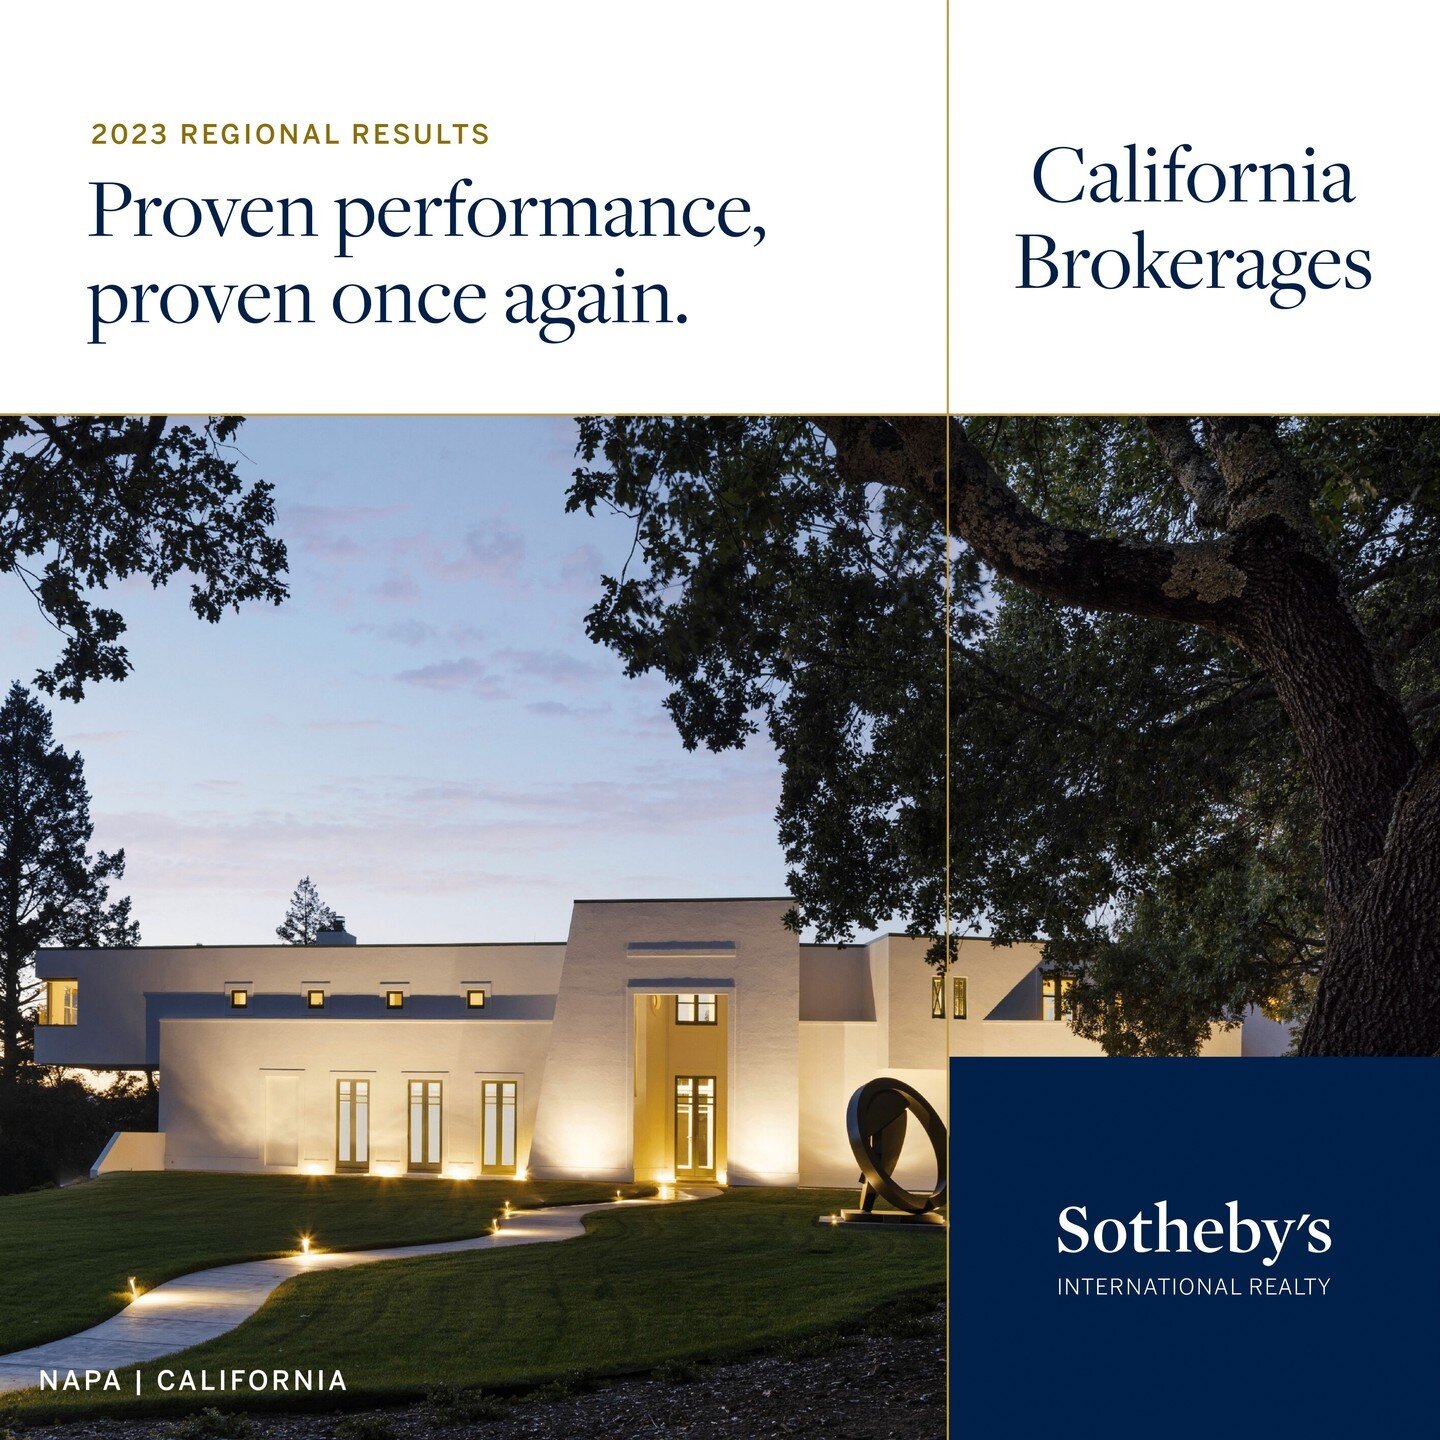 Together in 2023, Golden Gate Sotheby&rsquo;s International Realty, alongside our Sotheby&rsquo;s International Realty colleagues throughout California, achieved $20.2 billion in total sales volume and closed 11,791 transaction sides. The market isn&